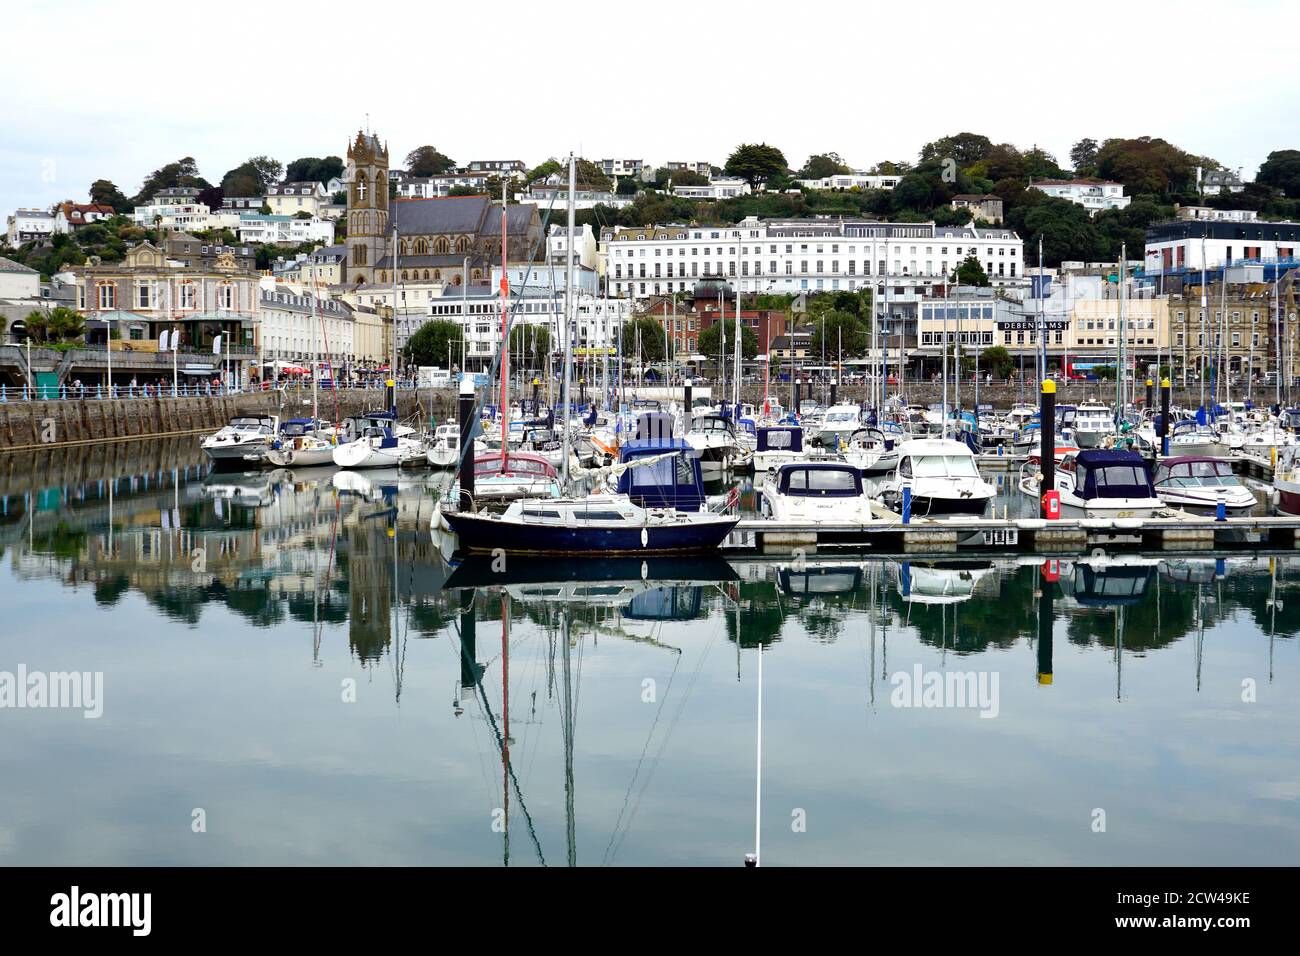 Torquay, Devon, UK.  September 15, 2020. Holidaymakers enjoying the quayside of the beautiful inner harbour at Torquay in Devon, UK. Stock Photo